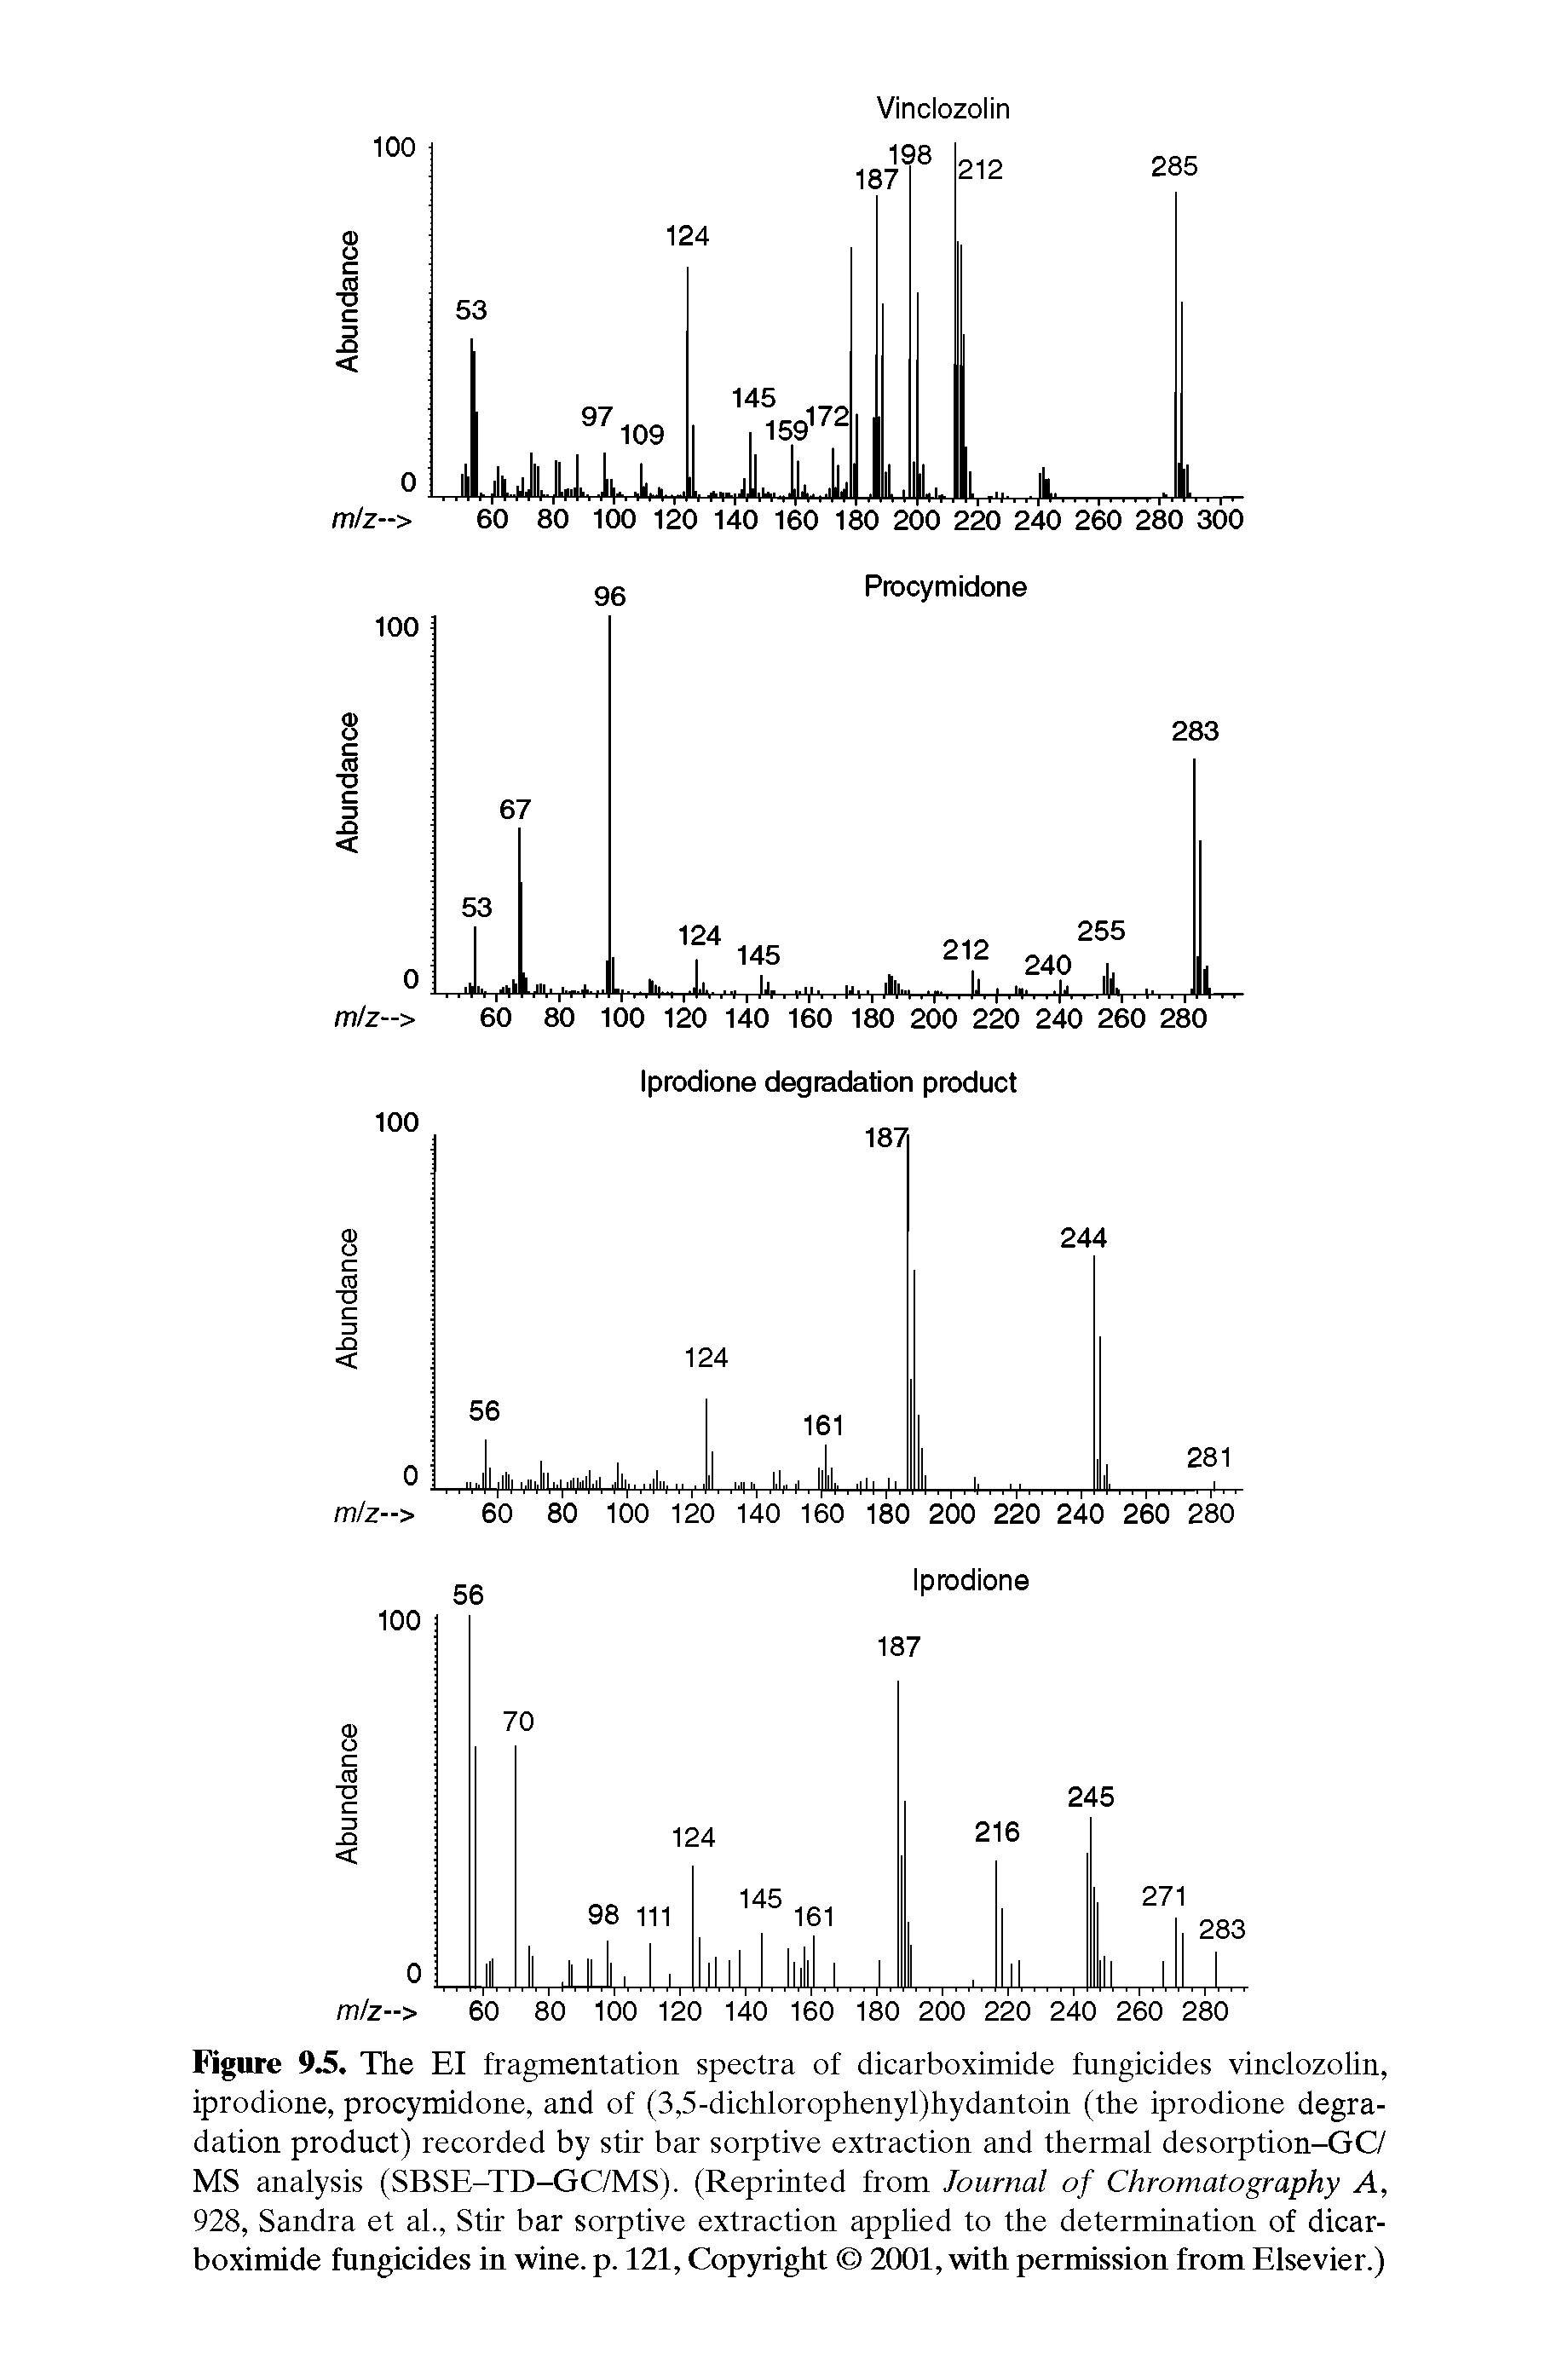 Figure 9.5. The El fragmentation spectra of dicarboximide fungicides vinclozolin, iprodione, procymidone, and of (3,5-dichlorophenyl)hydantoin (the iprodione degradation product) recorded by stir bar sorptive extraction and thermal desorption-GC/ MS analysis (SBSE-TD-GC/MS). (Reprinted from Journal of Chromatography A, 928, Sandra et al., Stir bar sorptive extraction applied to the determination of dicarboximide fungicides in wine. p. 121, Copyright 2001, with permission from Elsevier.)...